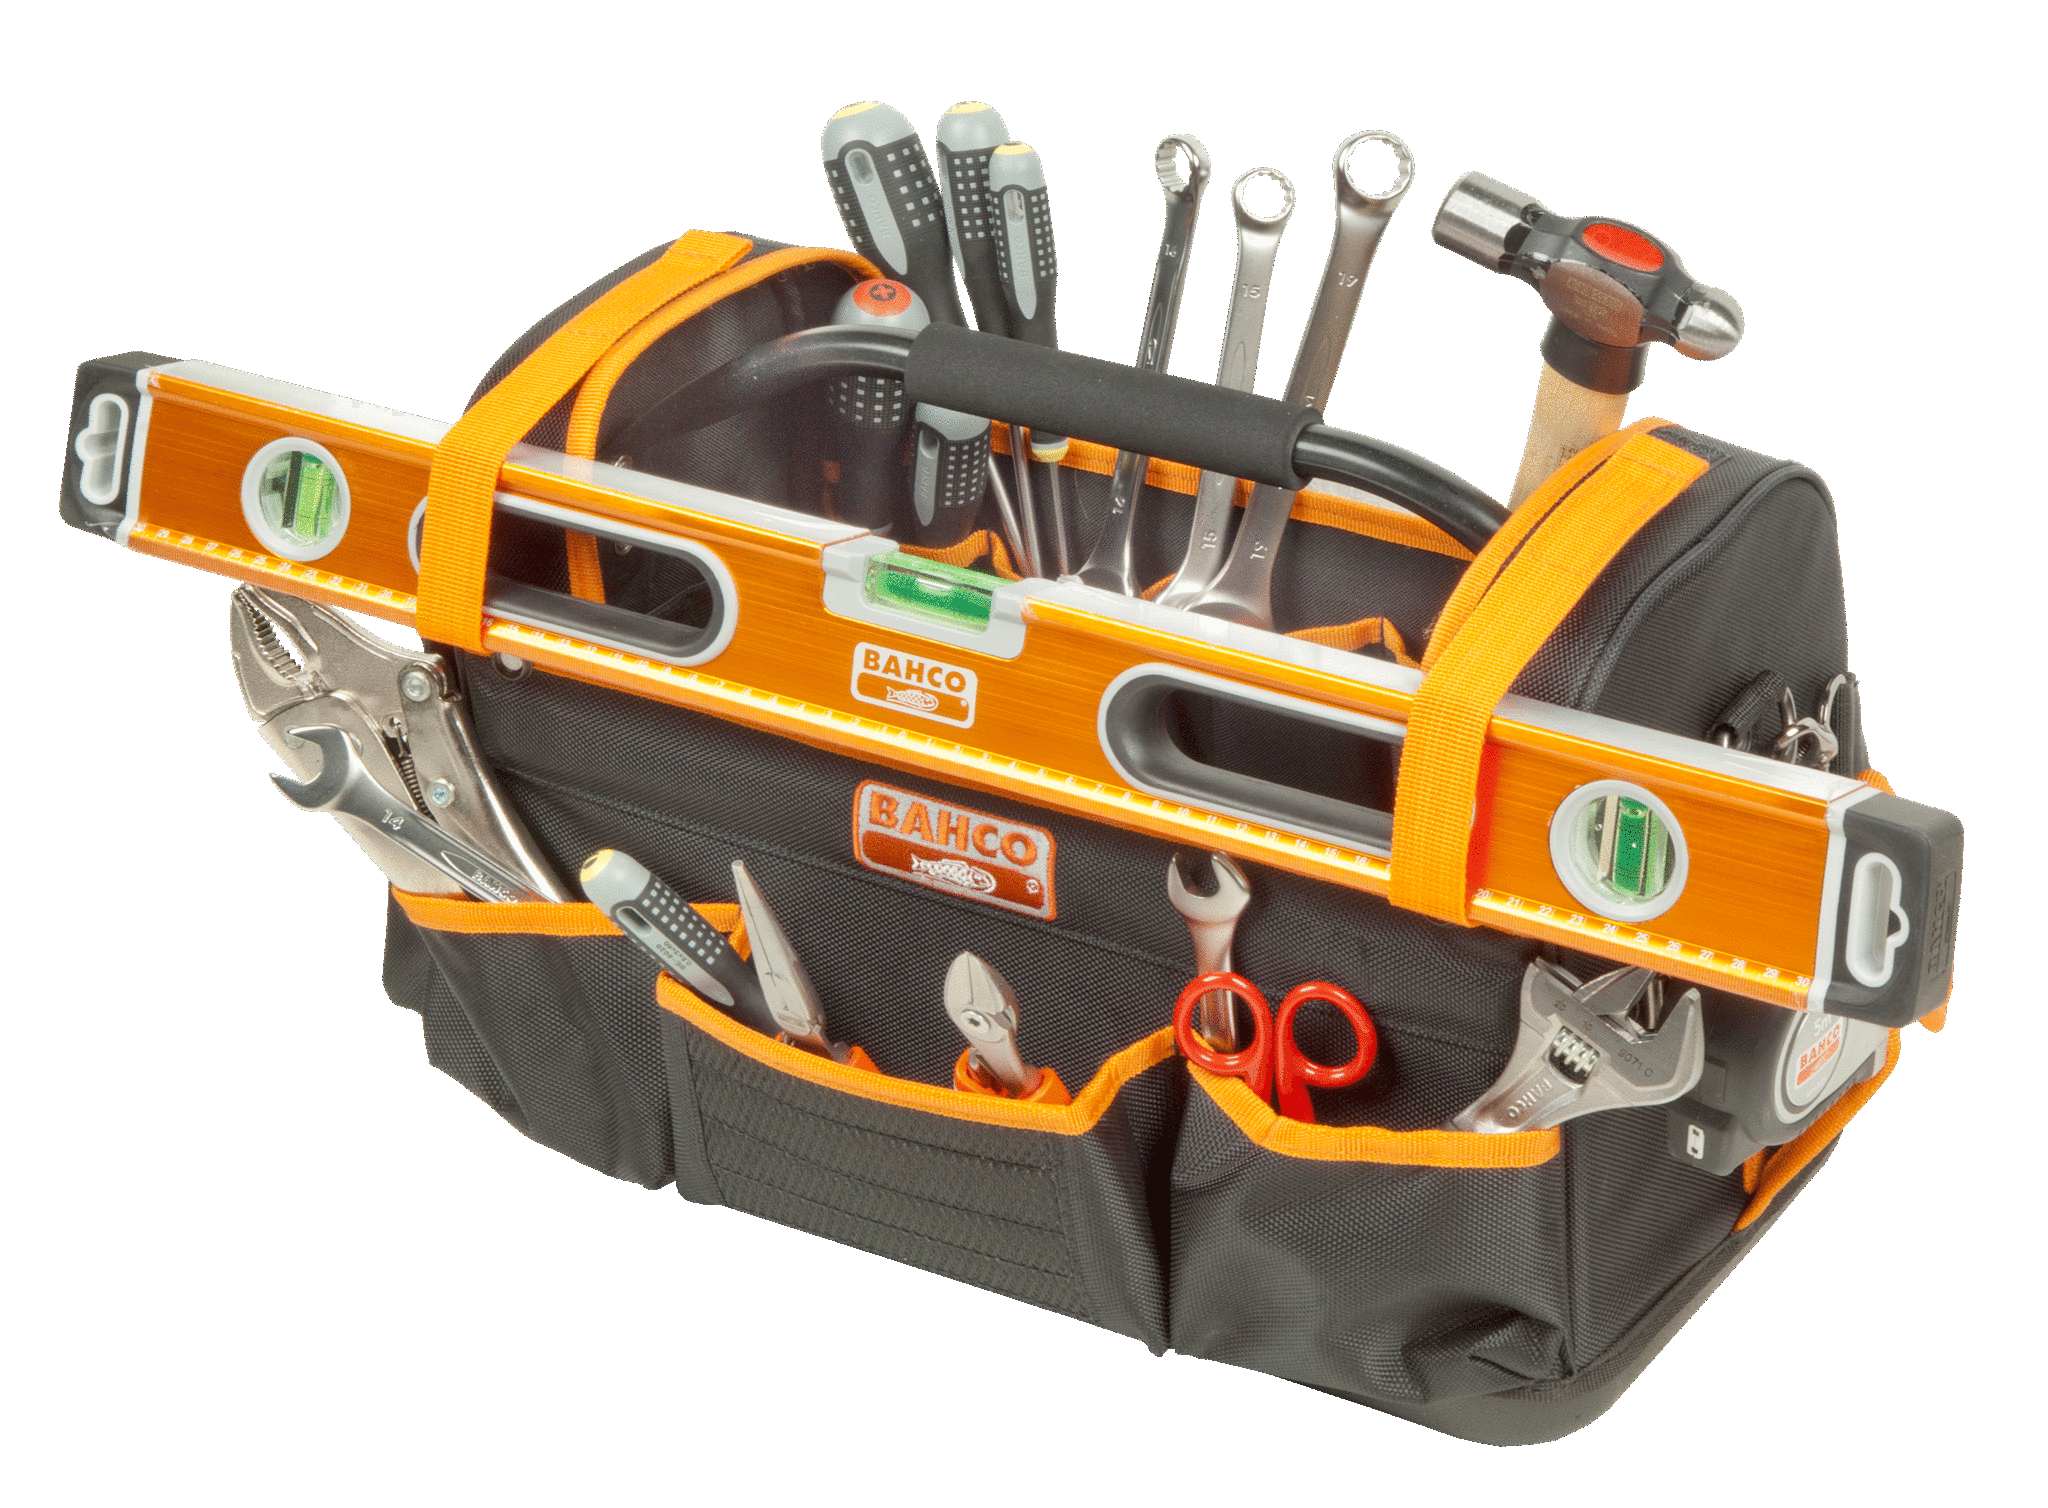 24 L Open Top Fabric Tool Bags with Rigid Base - 3100TB by Bahco